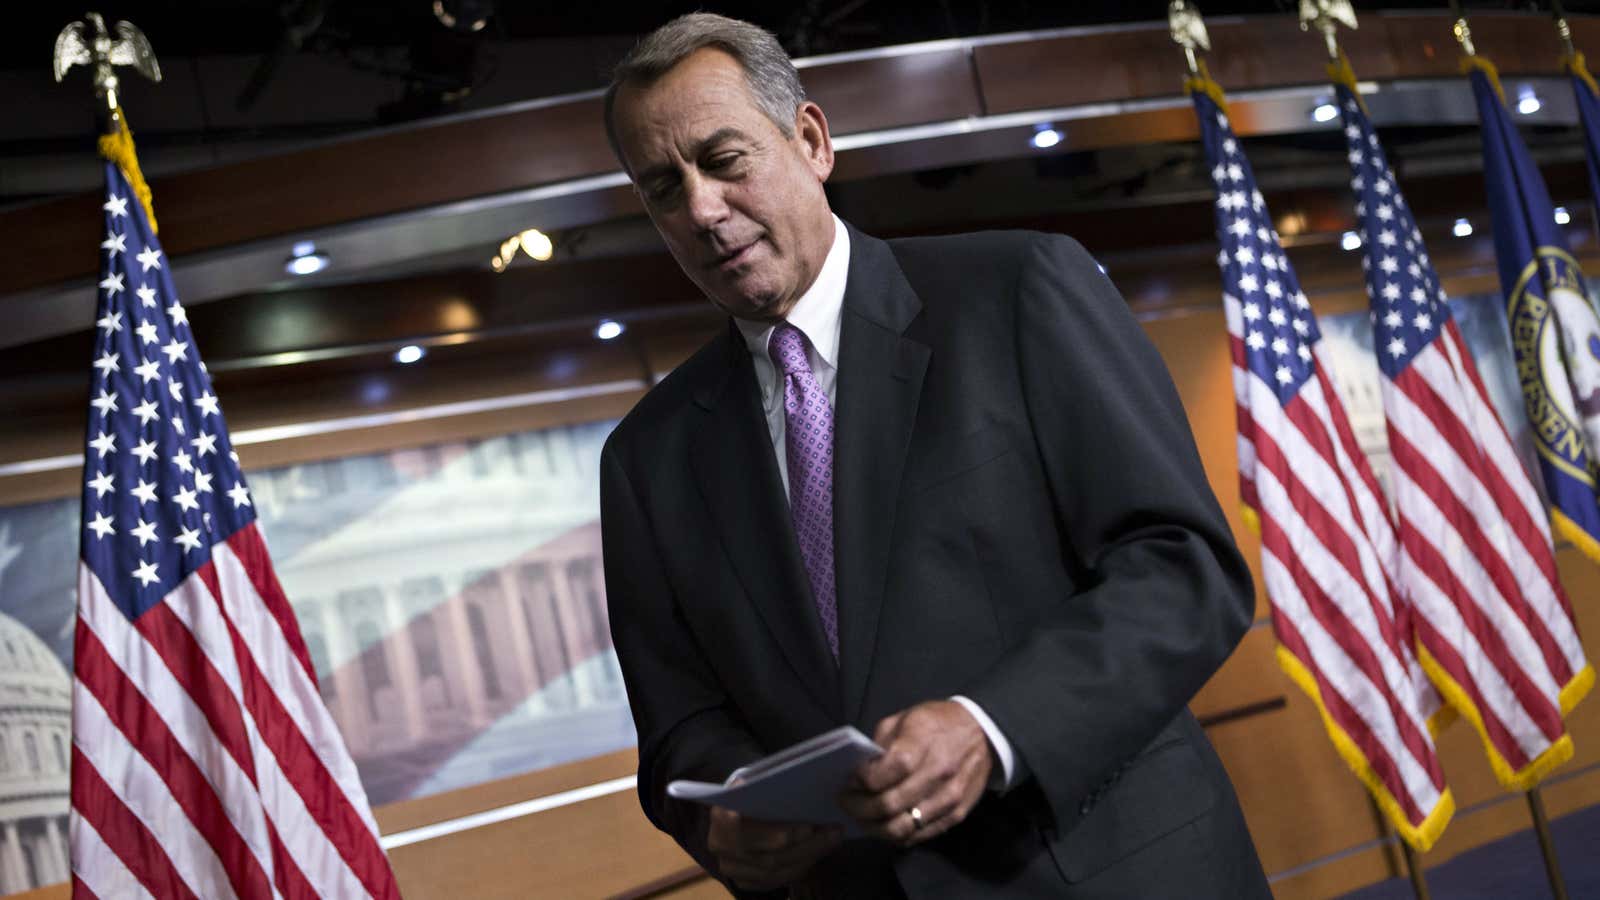 Speaker of the House John Boehner has presided over one of the least productive, least popular Congresses in history.